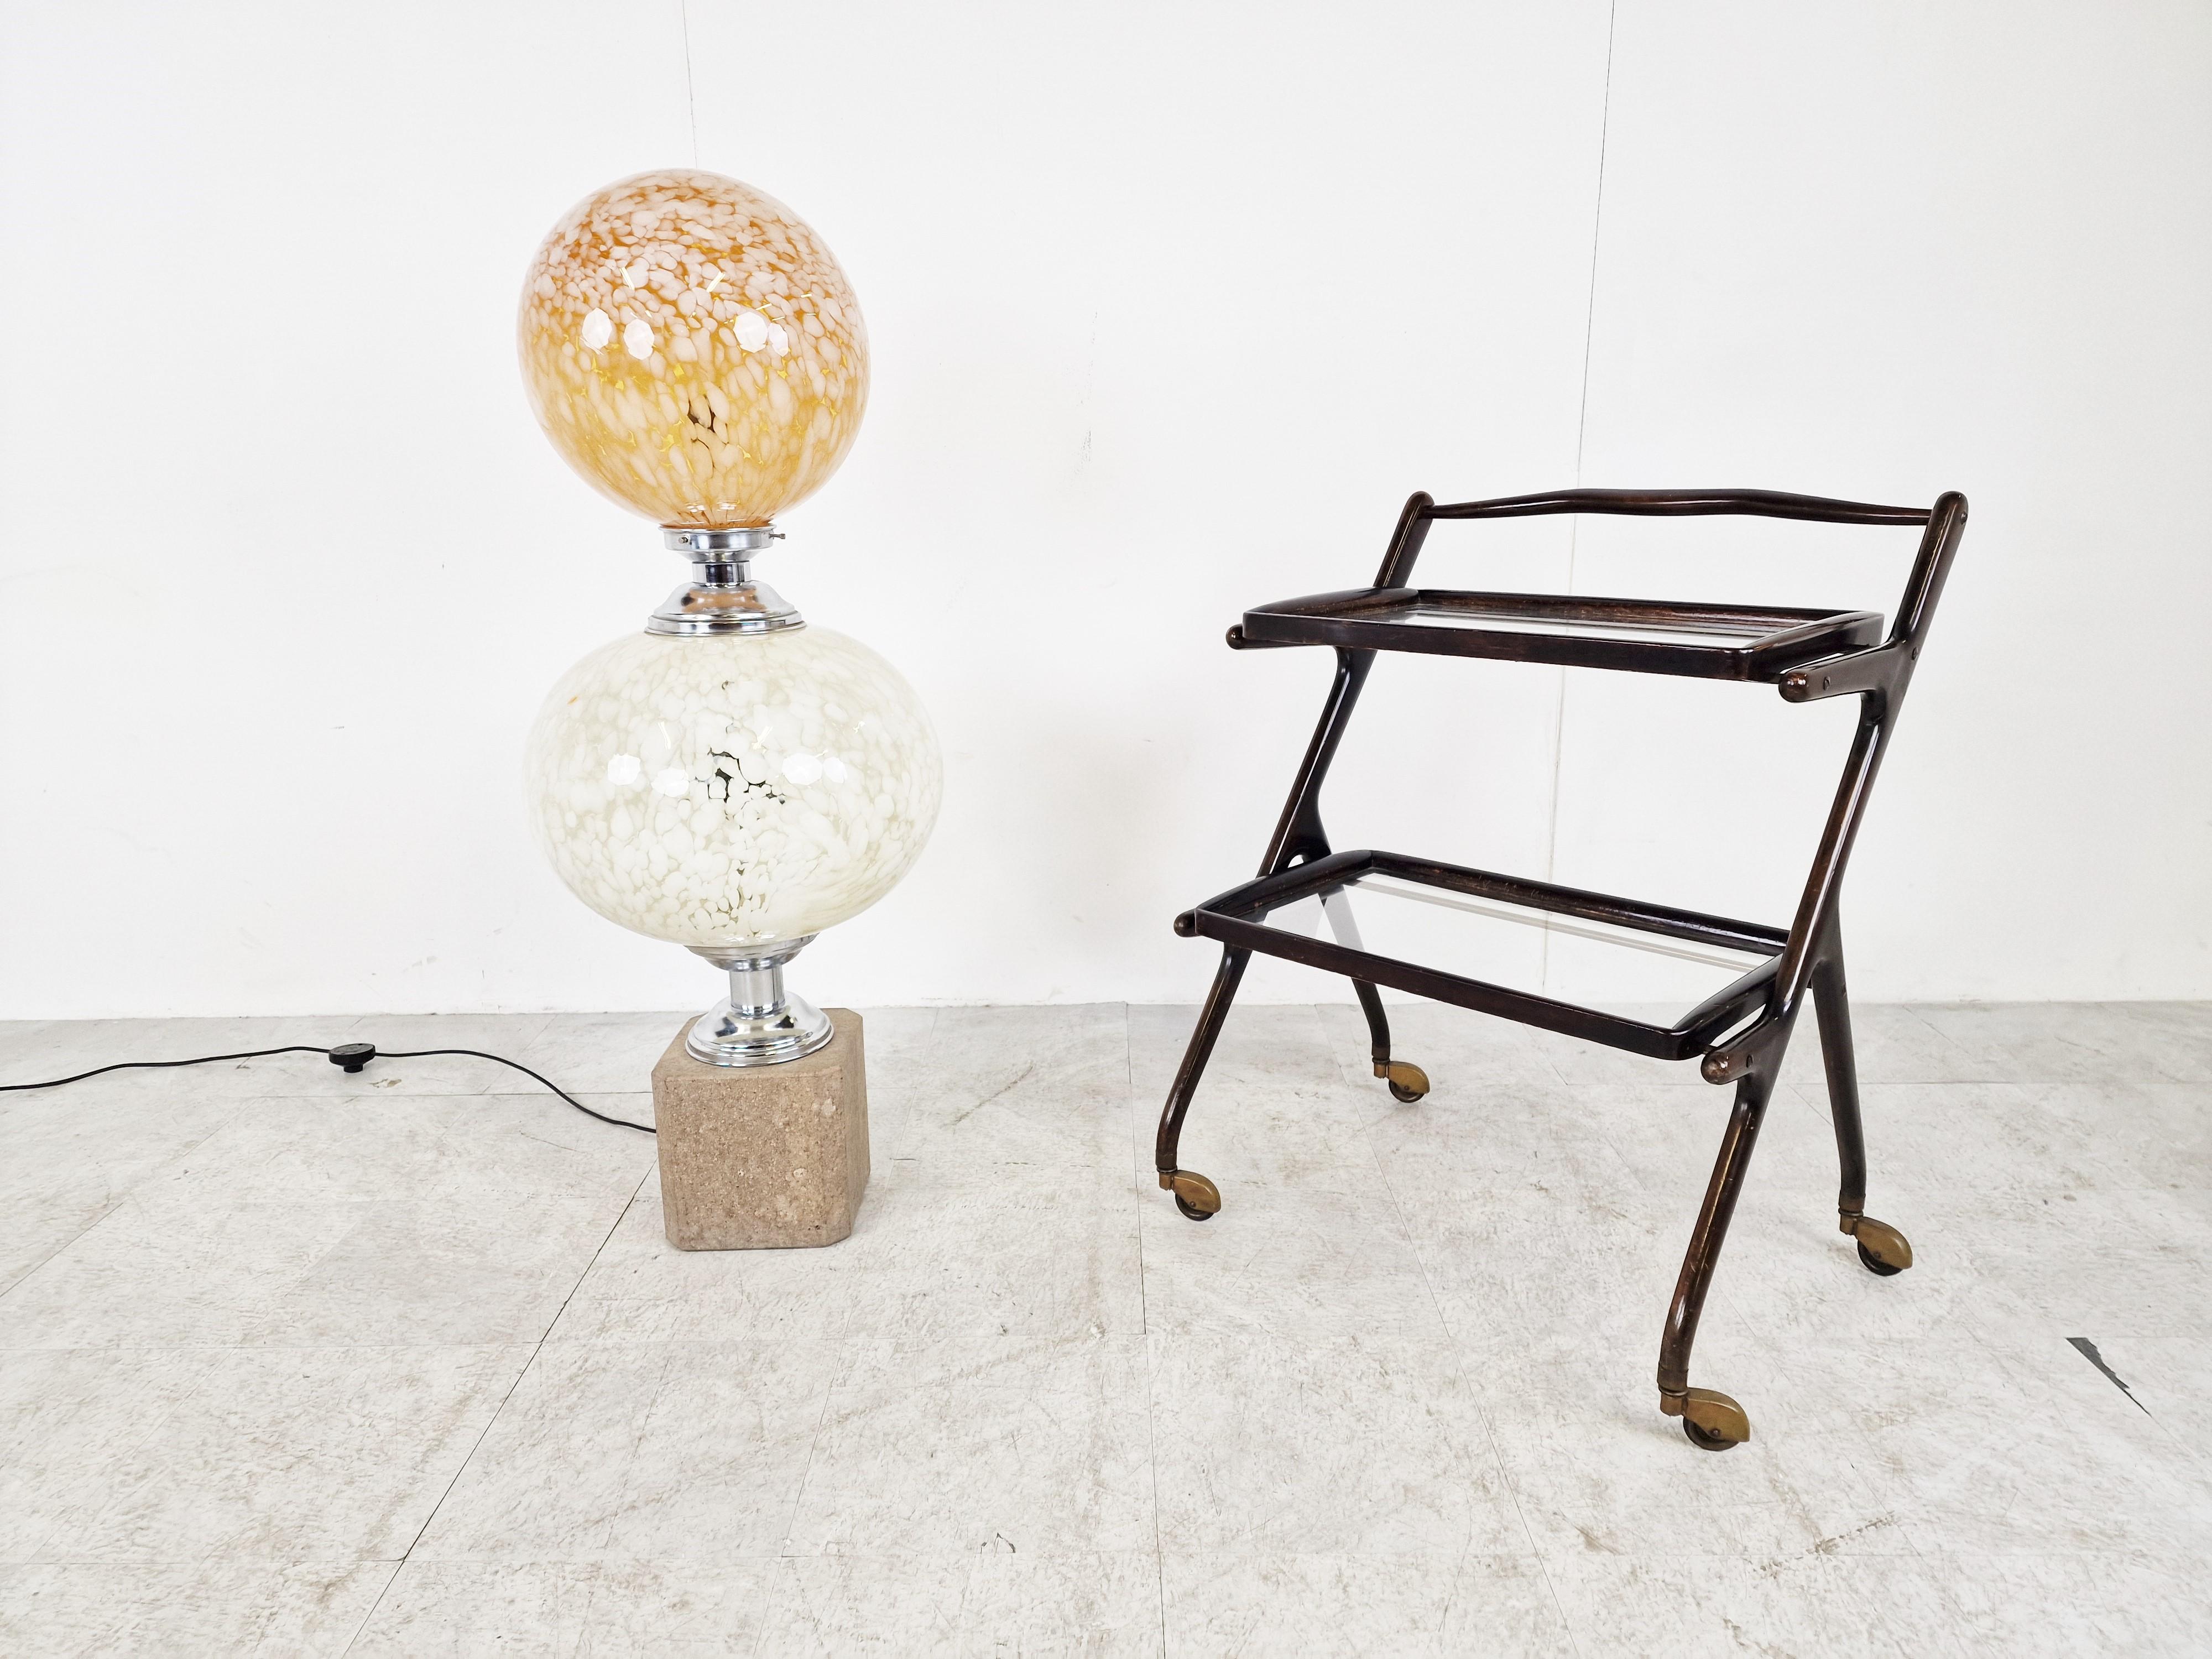 Rare floor lamp with two murano glass globes and a marble and chrome base.

The lamp emist a beautiful soft and dim light.

Tested and ready for use.

Very good condition

The lamp works with two regular E26/E27 light bulbs. 

1960s -